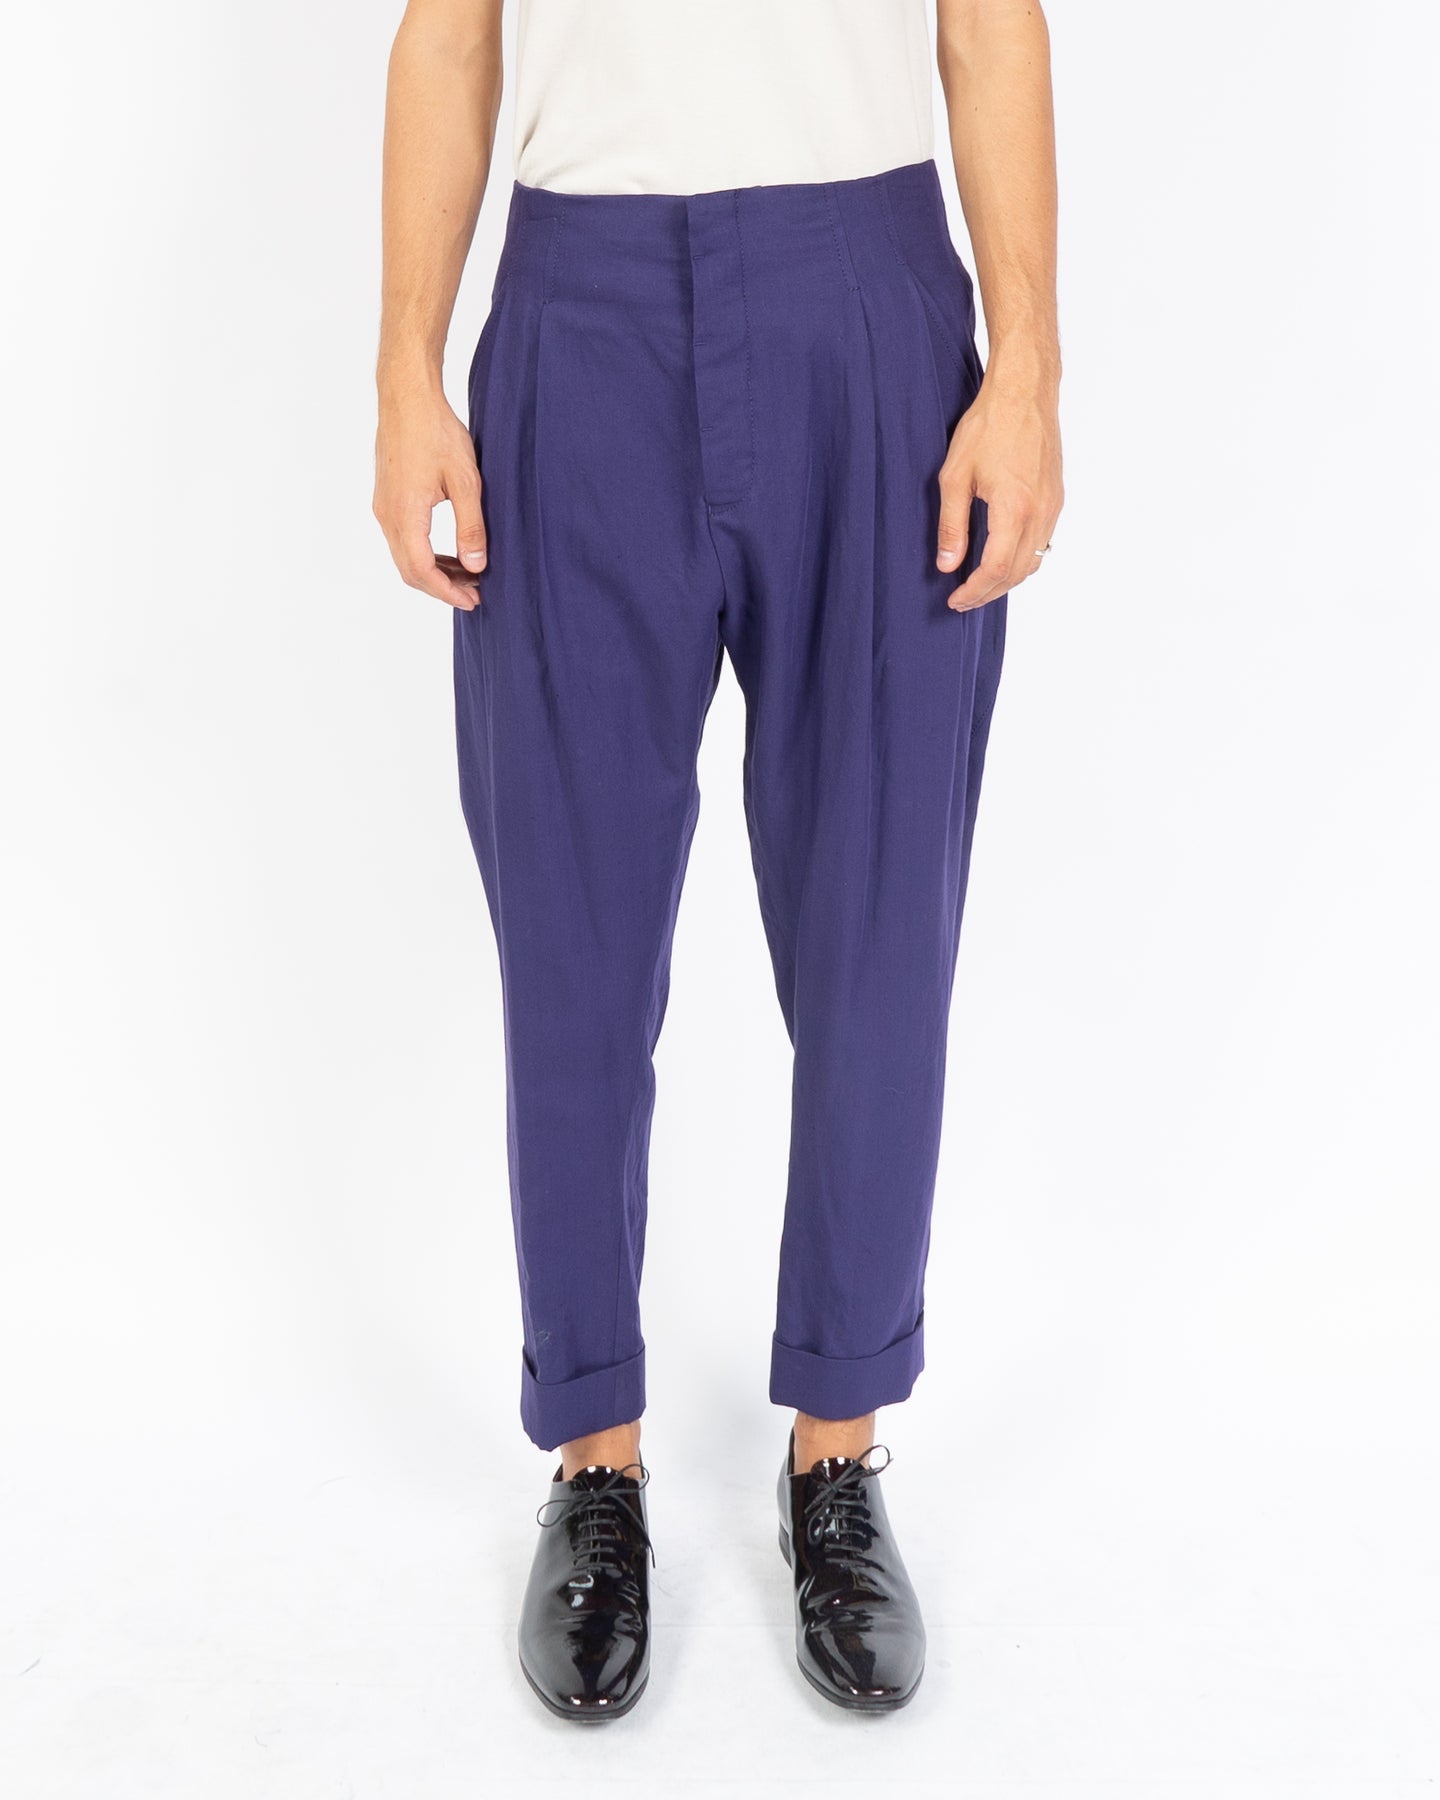 SS18 Violet Cropped Trousers Sample